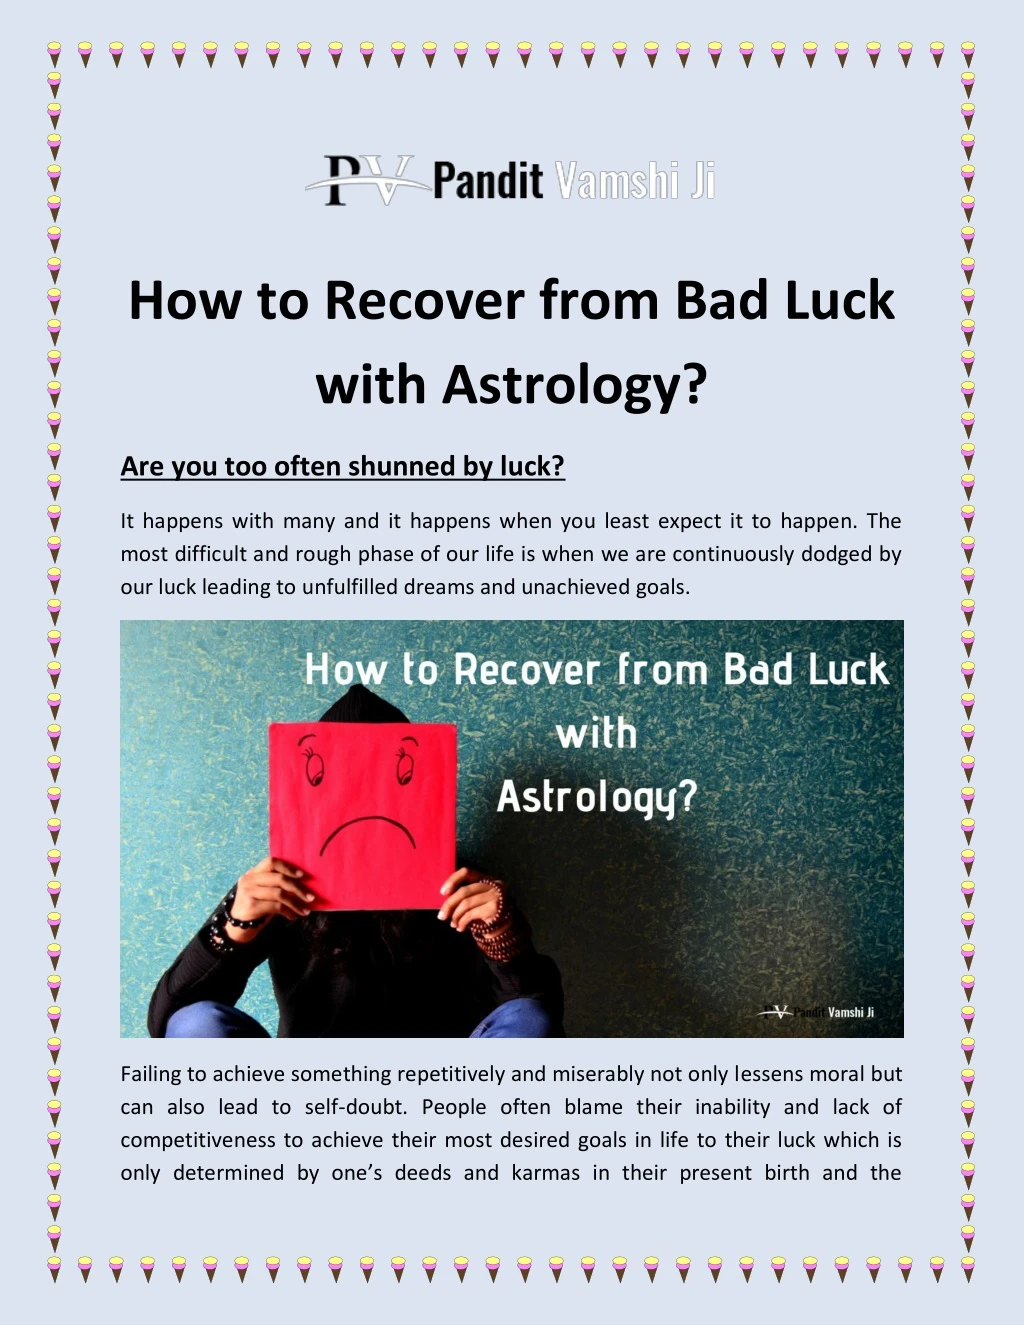 how to recover from bad luck with astrology